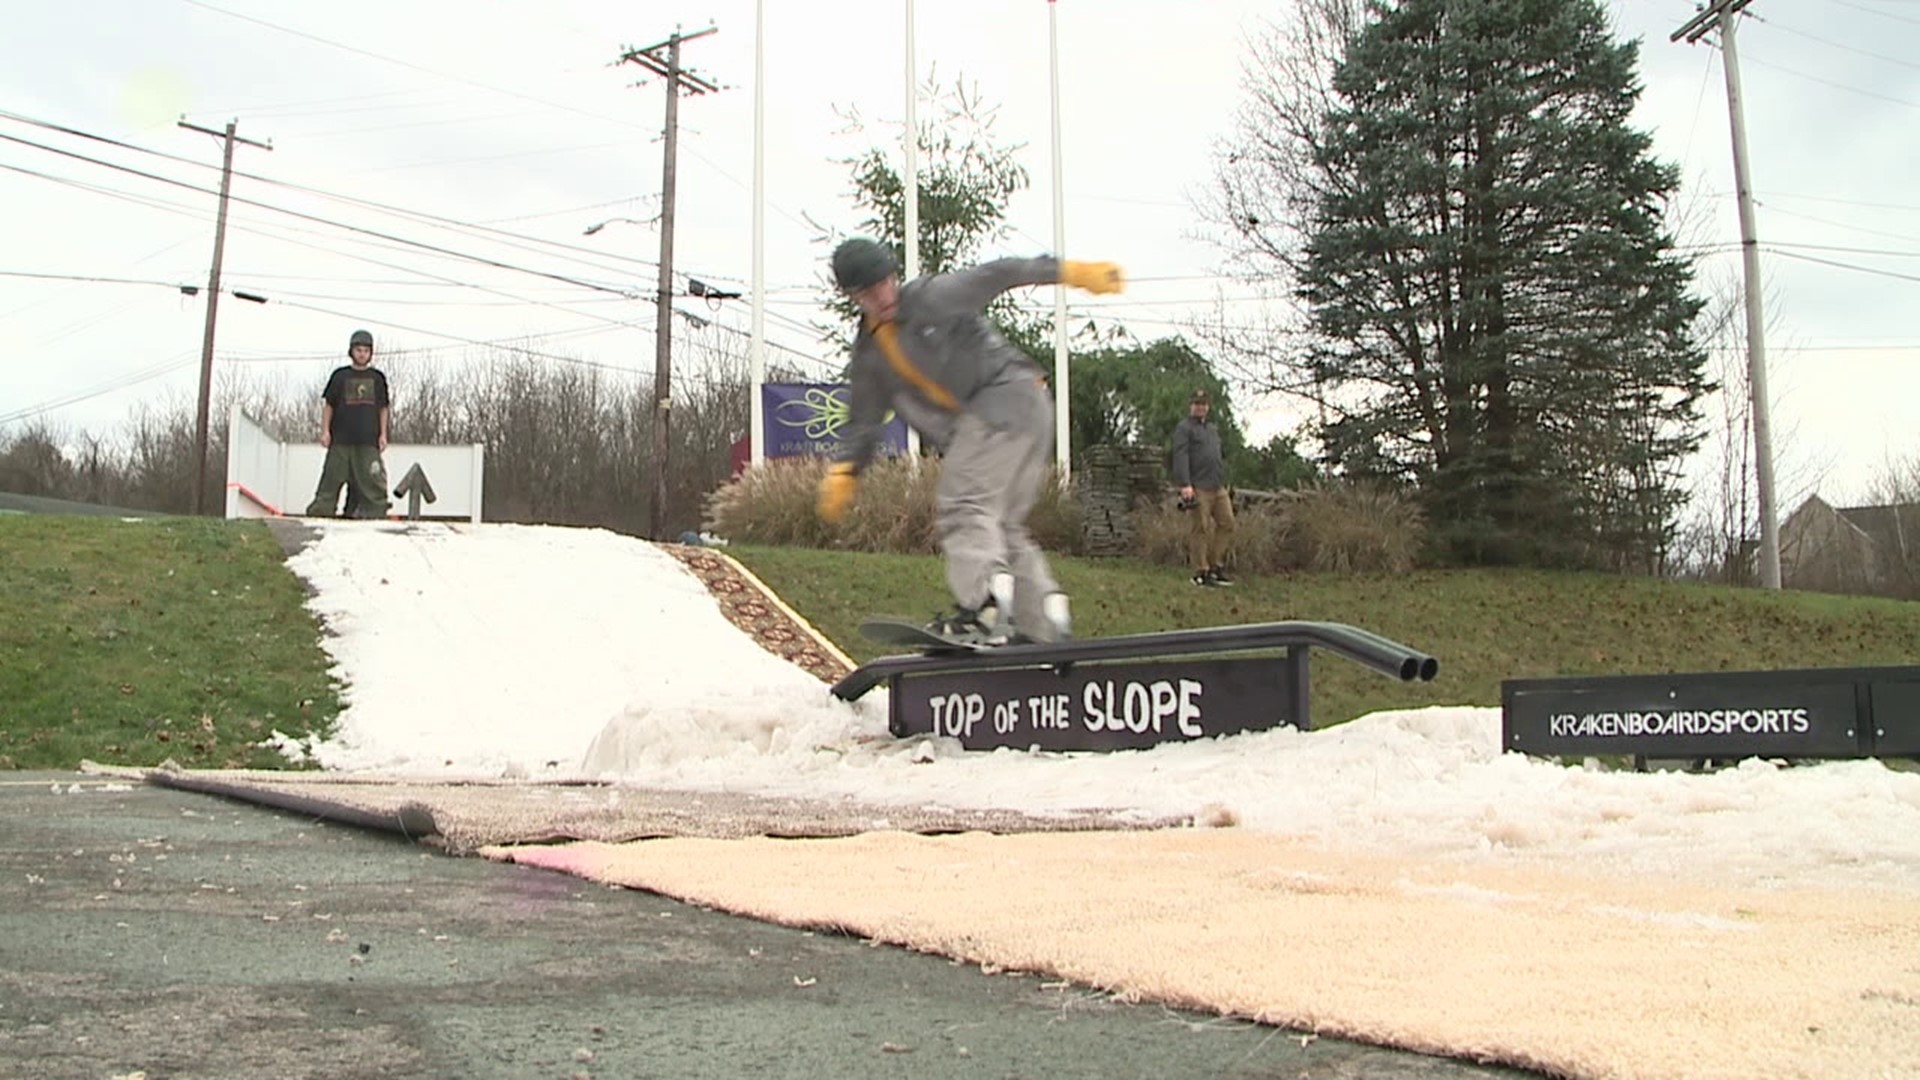 A group in Jenkins Township got a jump on snowboarding season Saturday afternoon.